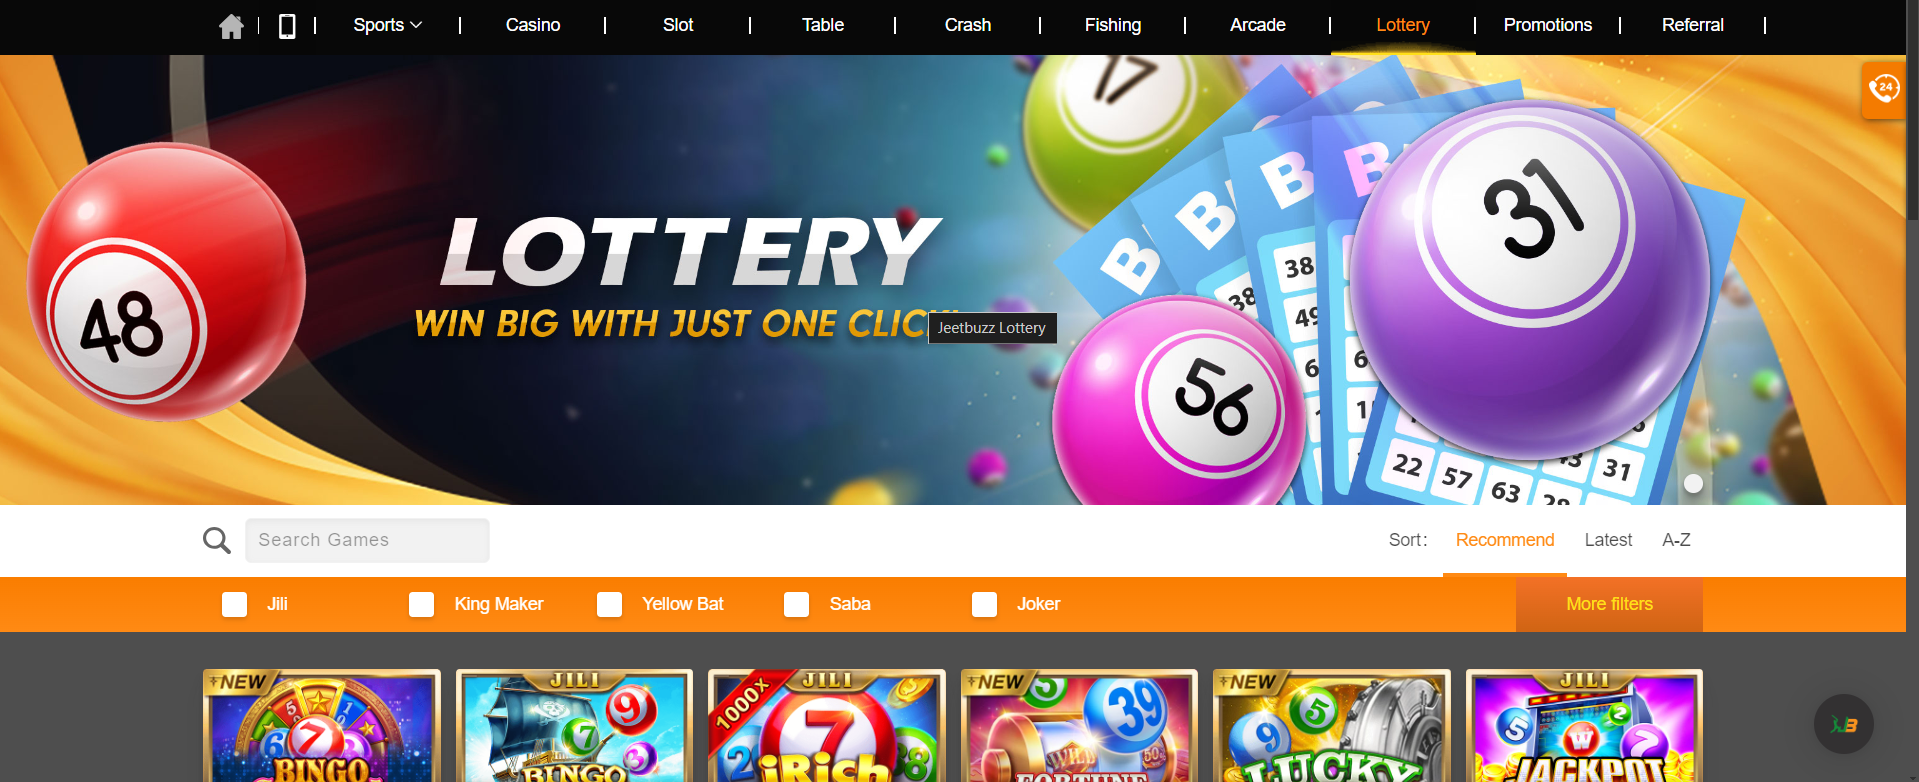 Lottery games on Jeetbuzz